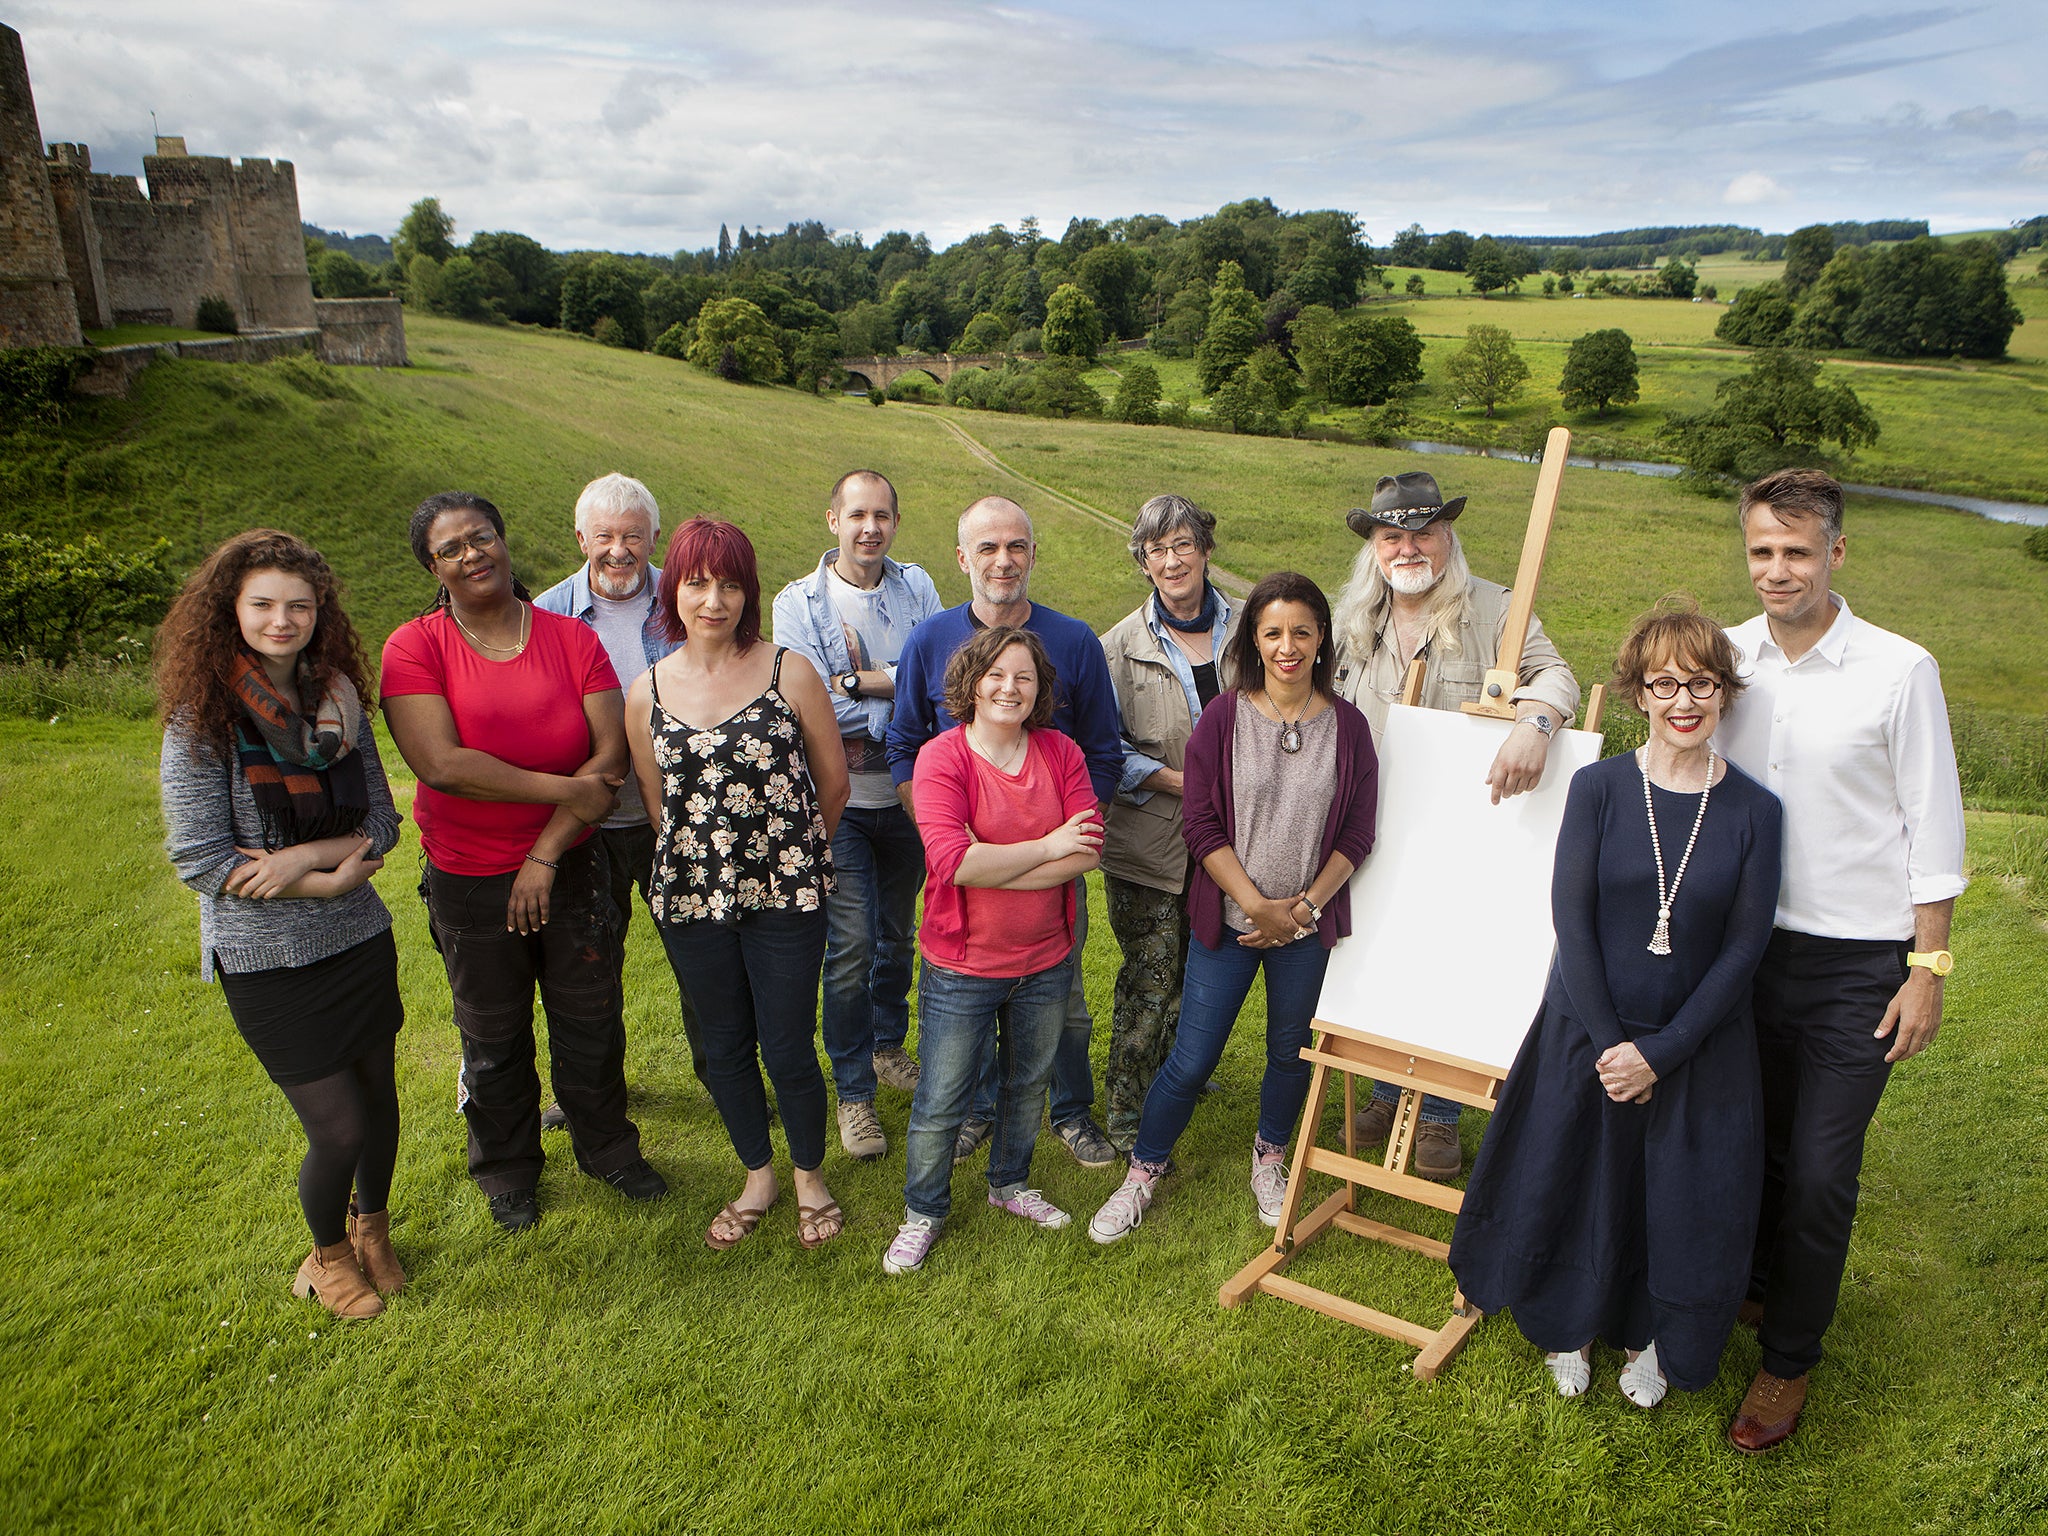 Claire Parker, Anne Blankson-Hemans, Melvyn Flint, Alison Stafford, Richard Salter, Paul Bell, Amy Goldring, Anthea Lay, Heather Harding, Jan Szymczuk, Una Stubbs and Richard Bacon in The Big Painting Challenge